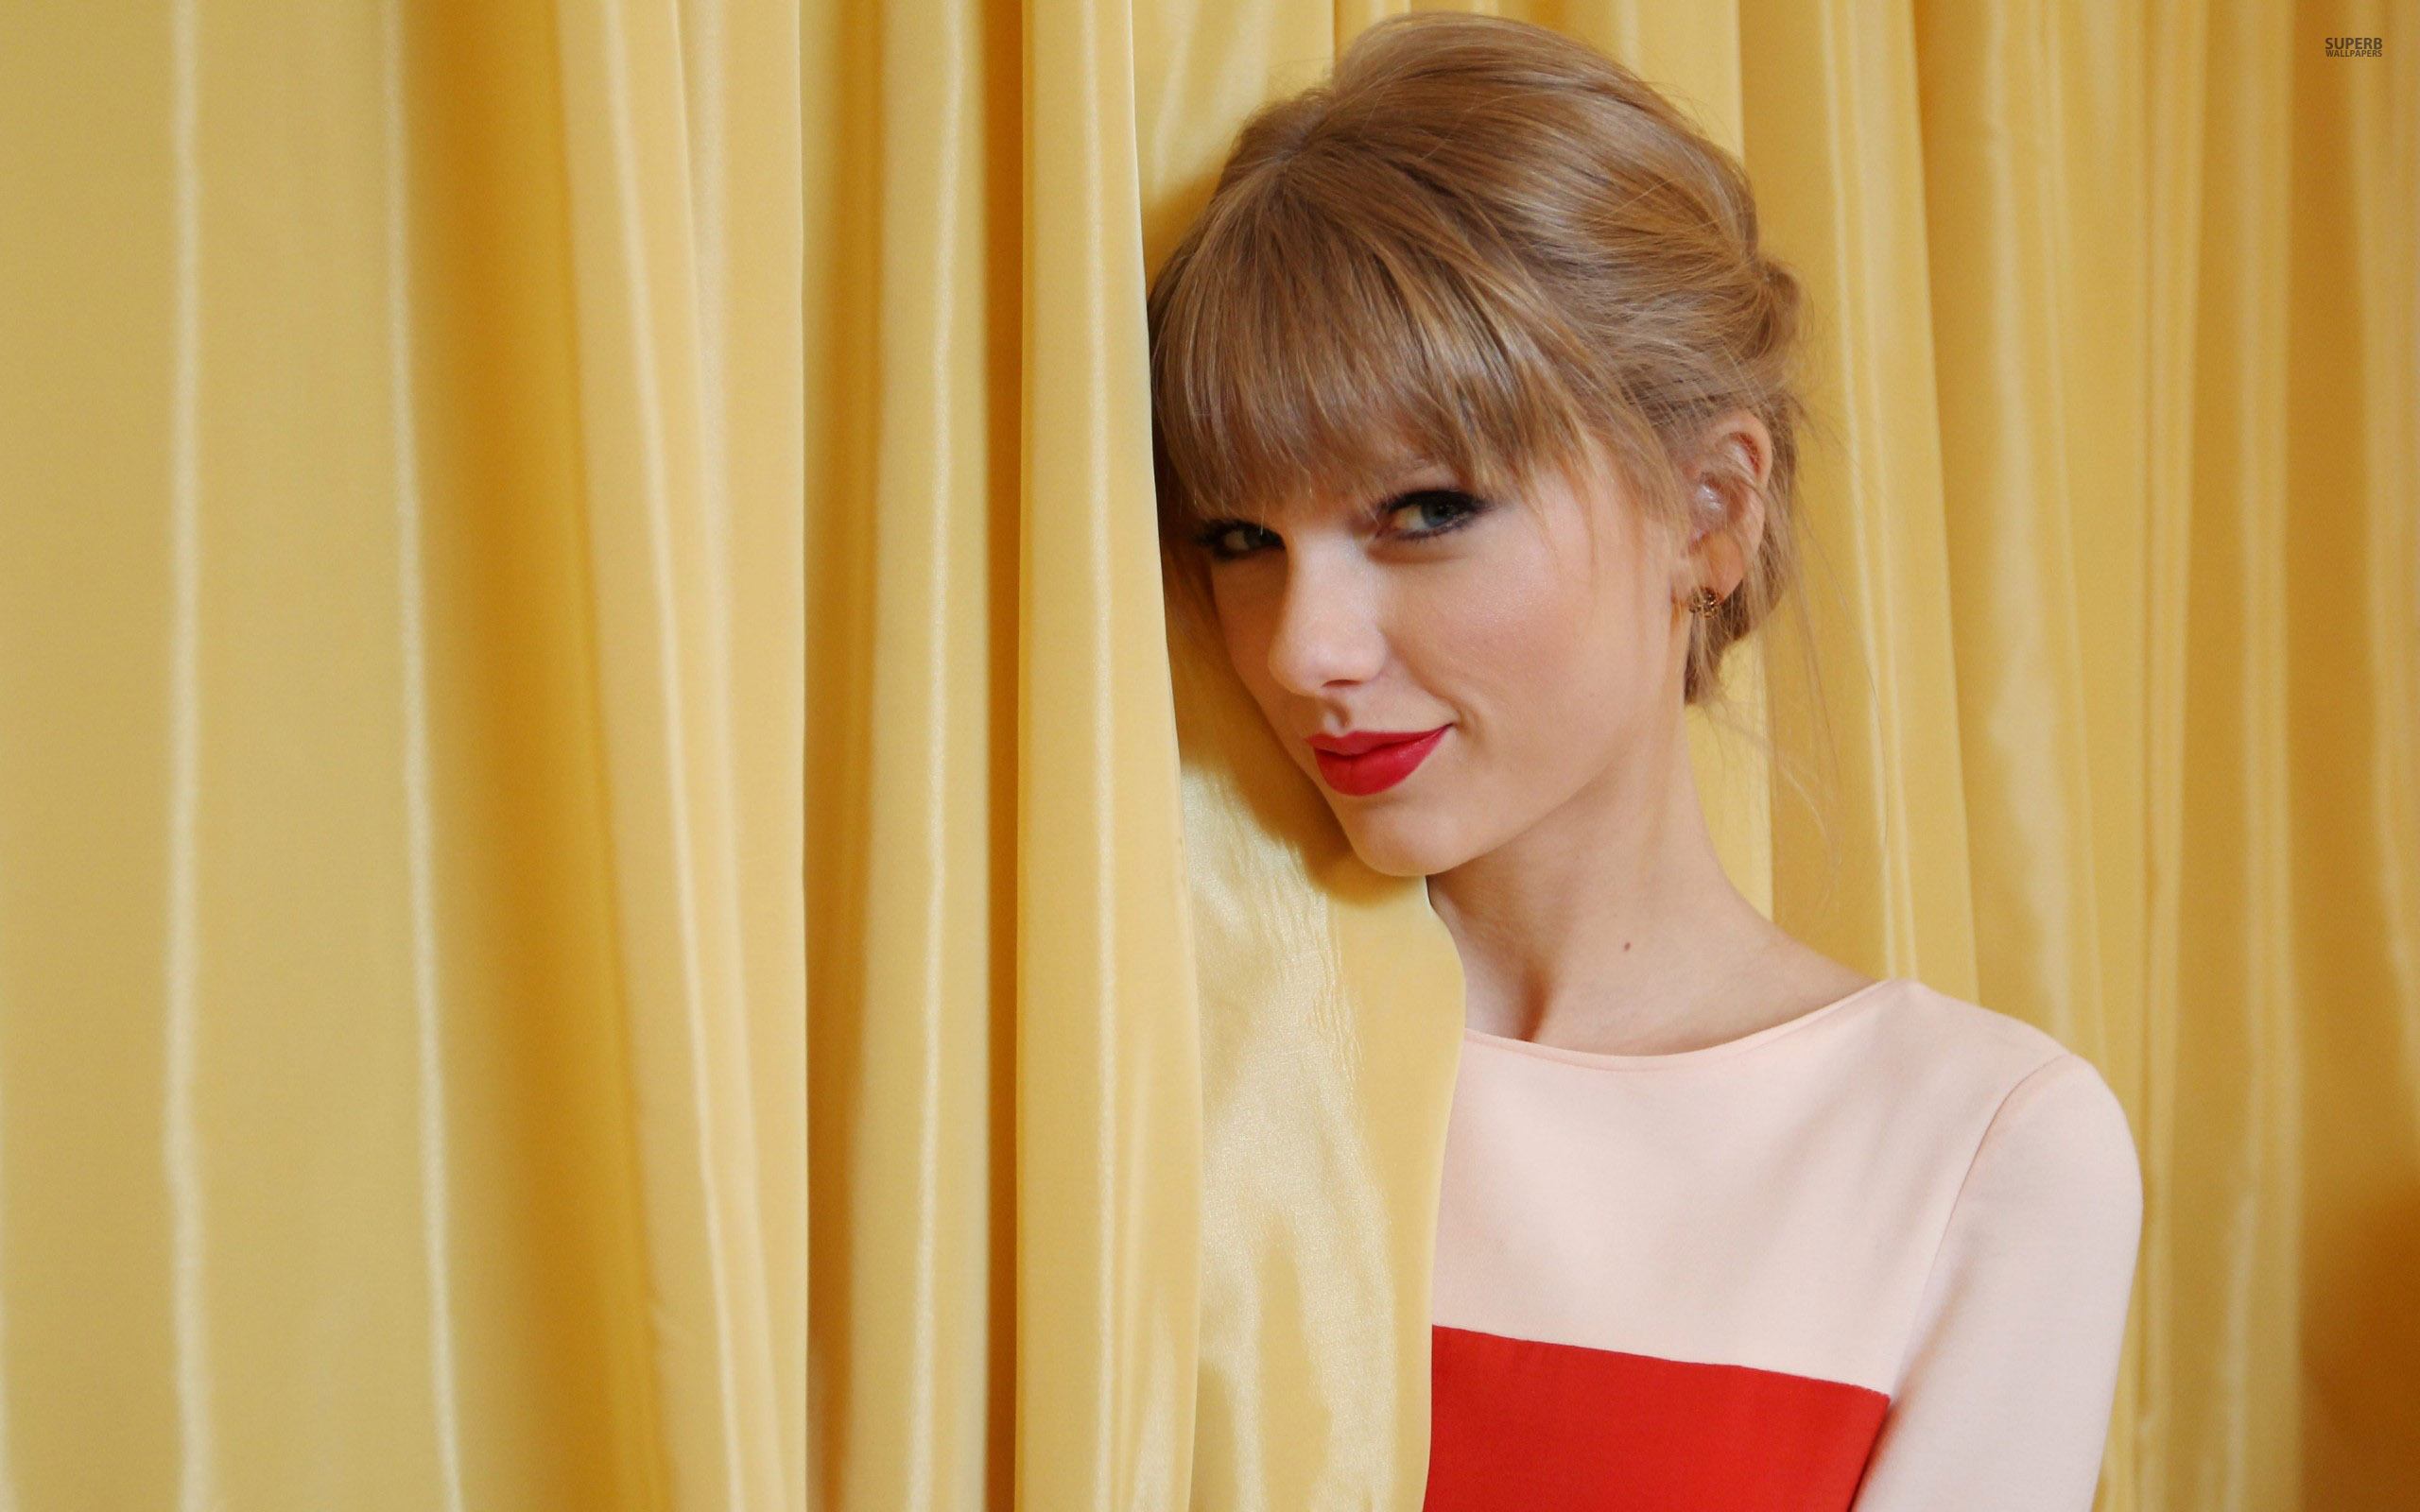 Taylor Swift is Glu’s Latest Celebrity Mobile Gaming Partnership